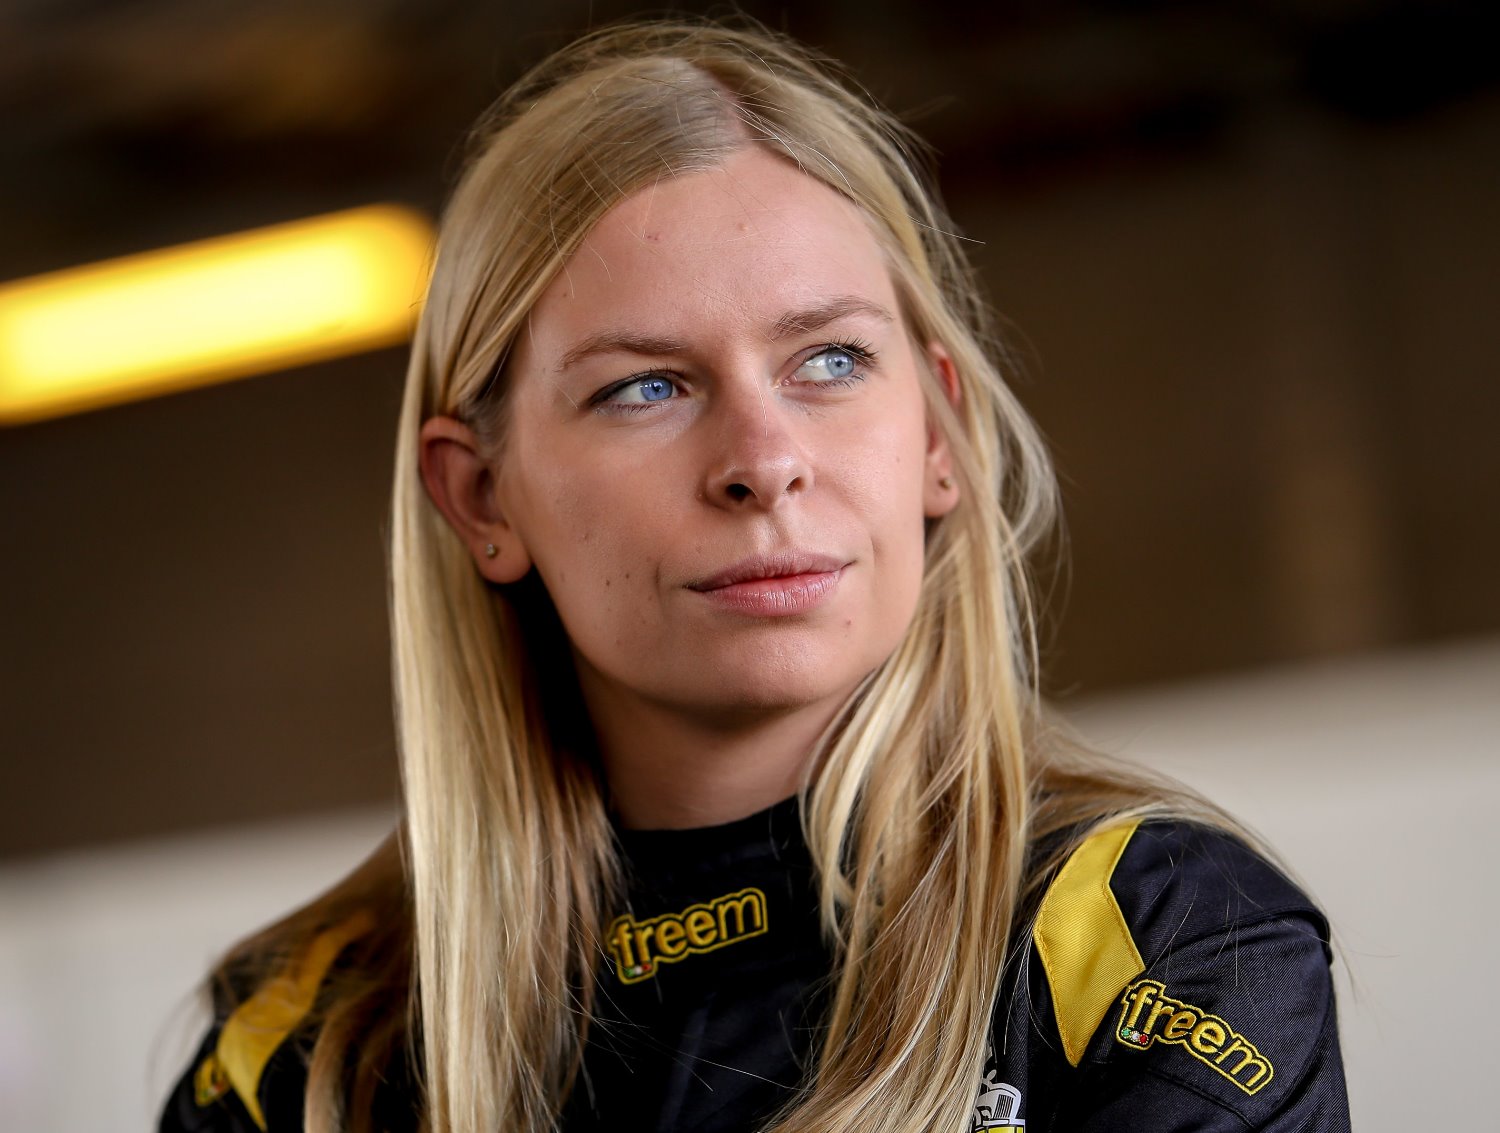 Christina Nielsen (Gear Team) was one of the Lambos disqualified